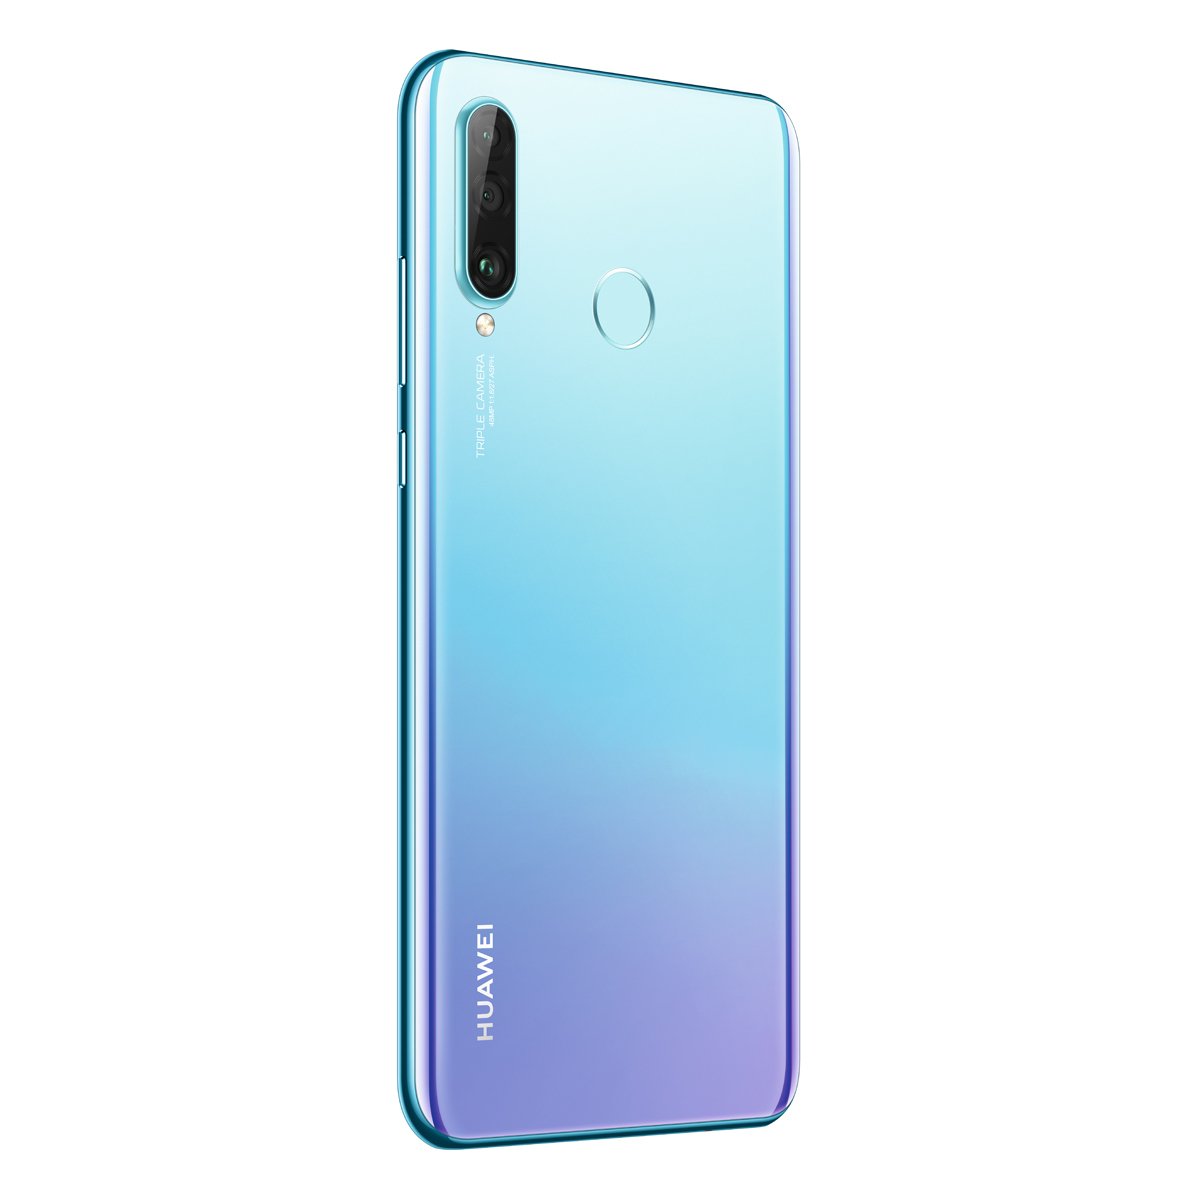 Huawei P30 Lite to get Breathing Crystal color variant soon - Gizmochina